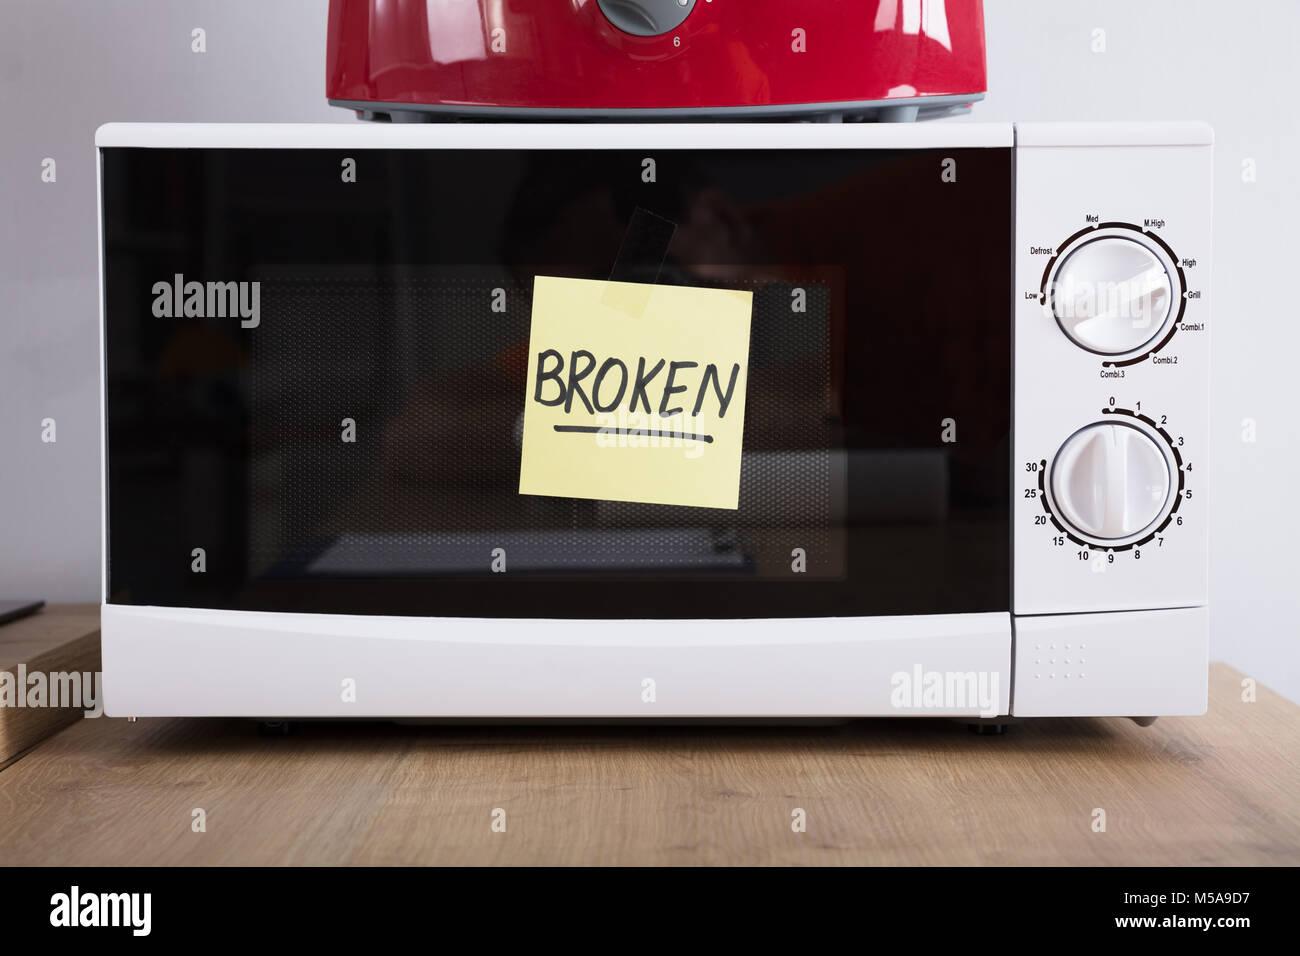 https://c8.alamy.com/comp/M5A9D7/close-up-of-a-microwave-oven-with-adhesive-notes-showing-broken-text-M5A9D7.jpg